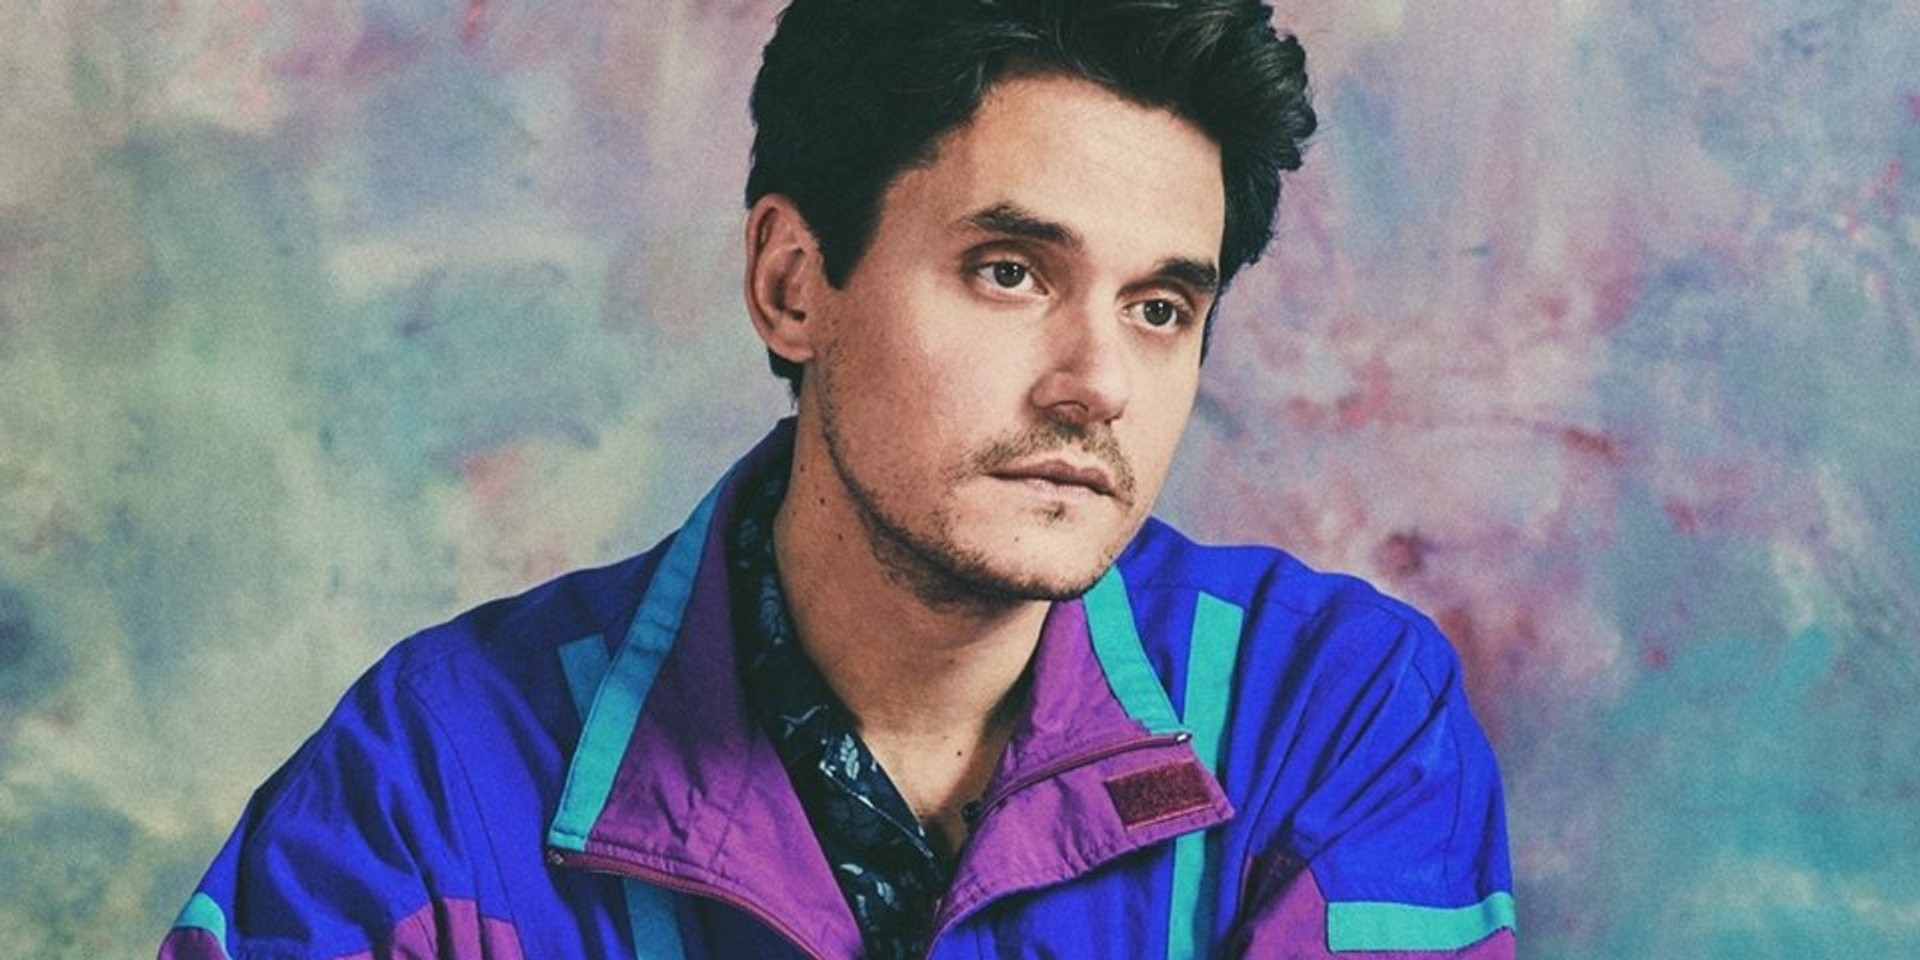 Fiona, Unmute, Crystal Jobli, and more to perform at John Mayer Night Part 2